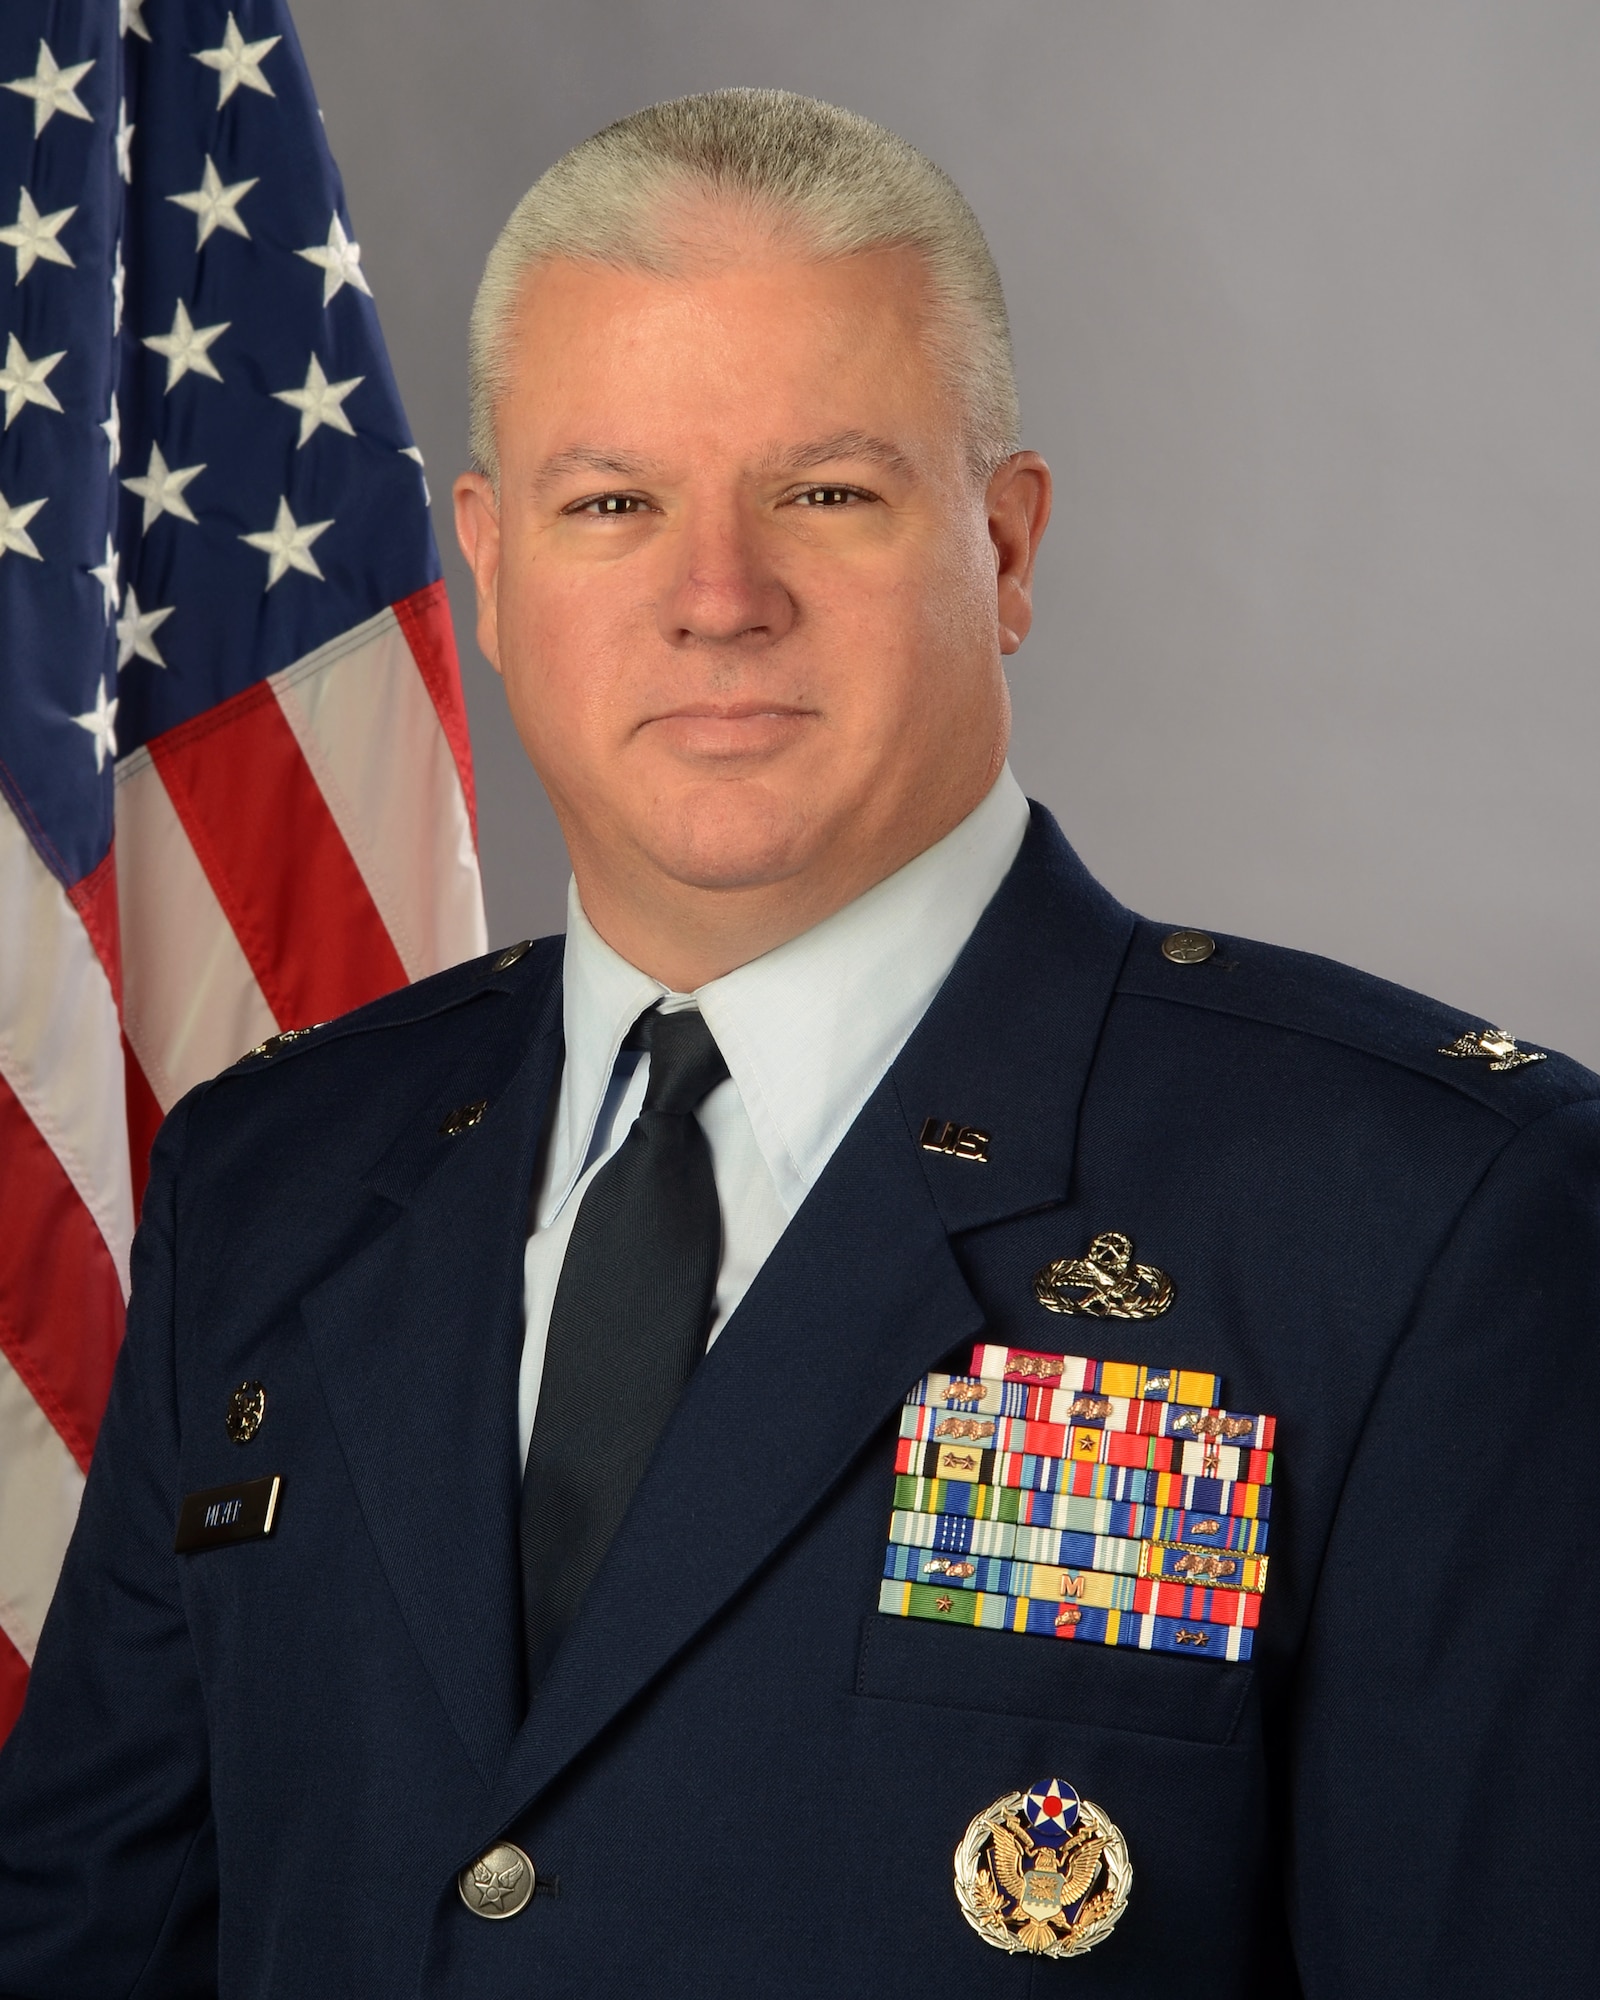 Portrait of U.S. Air Force Col. Adrian Meyer, commander of the 169th Maintenance Group assigned to the South Carolina Air National Guard’s 169th Fighter Wing at McEntire Joint National Guard Base, Jan. 30, 2020.